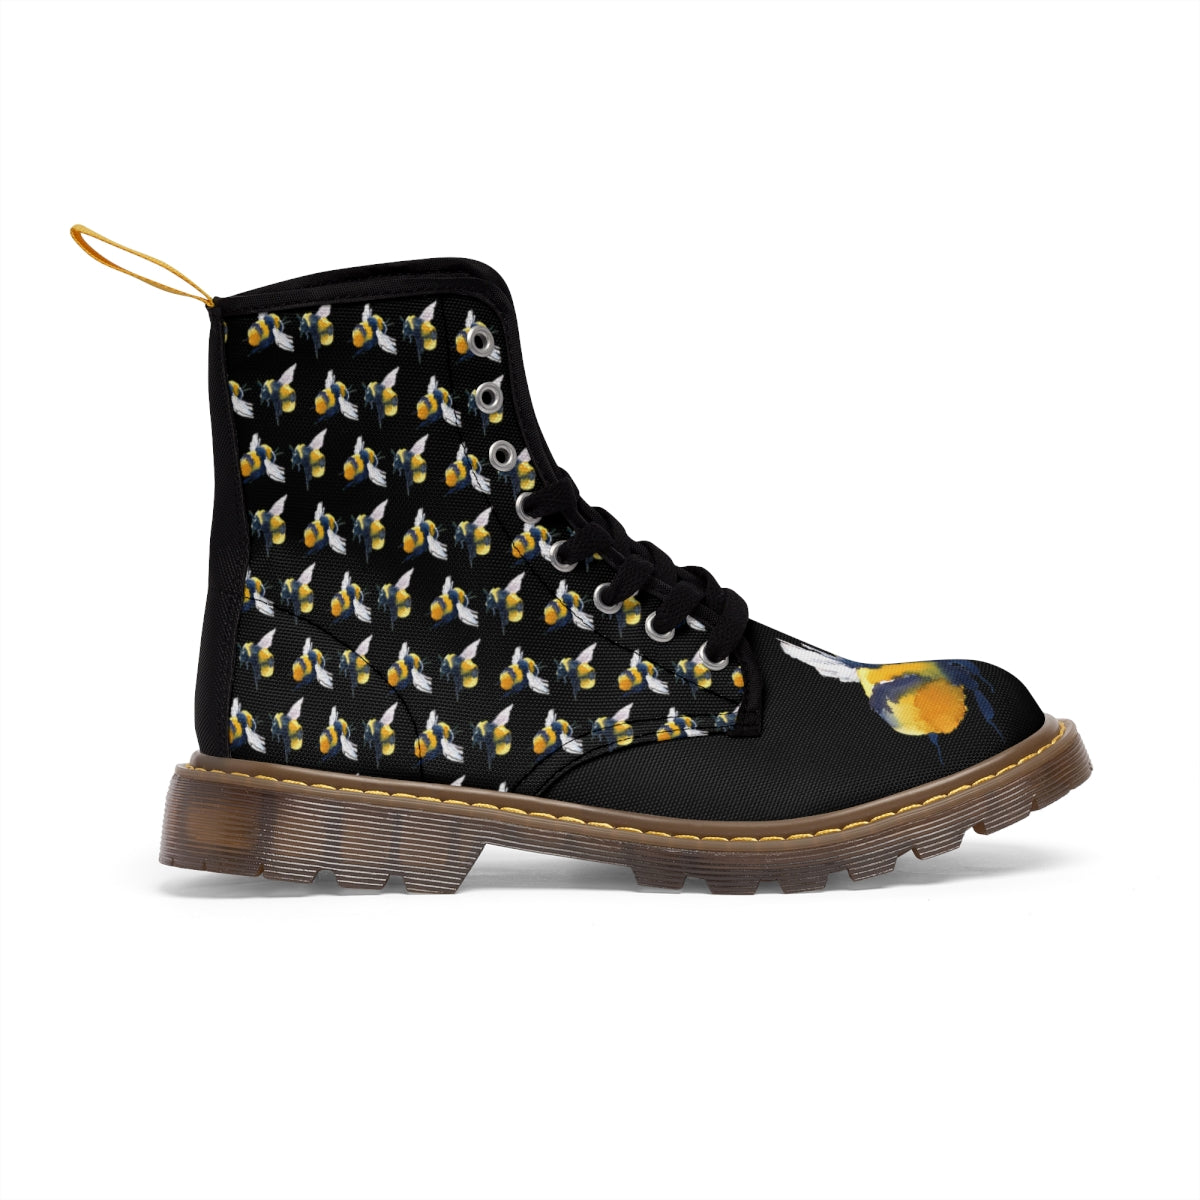 Friendly Flying Bees Men's Black Canvas Boots Shoes Bee boots combat boots gift for bee lover gift for him Mens boots mens fashion boots mens shoes Shoes unique mens boots vegan boots vegan combat boots